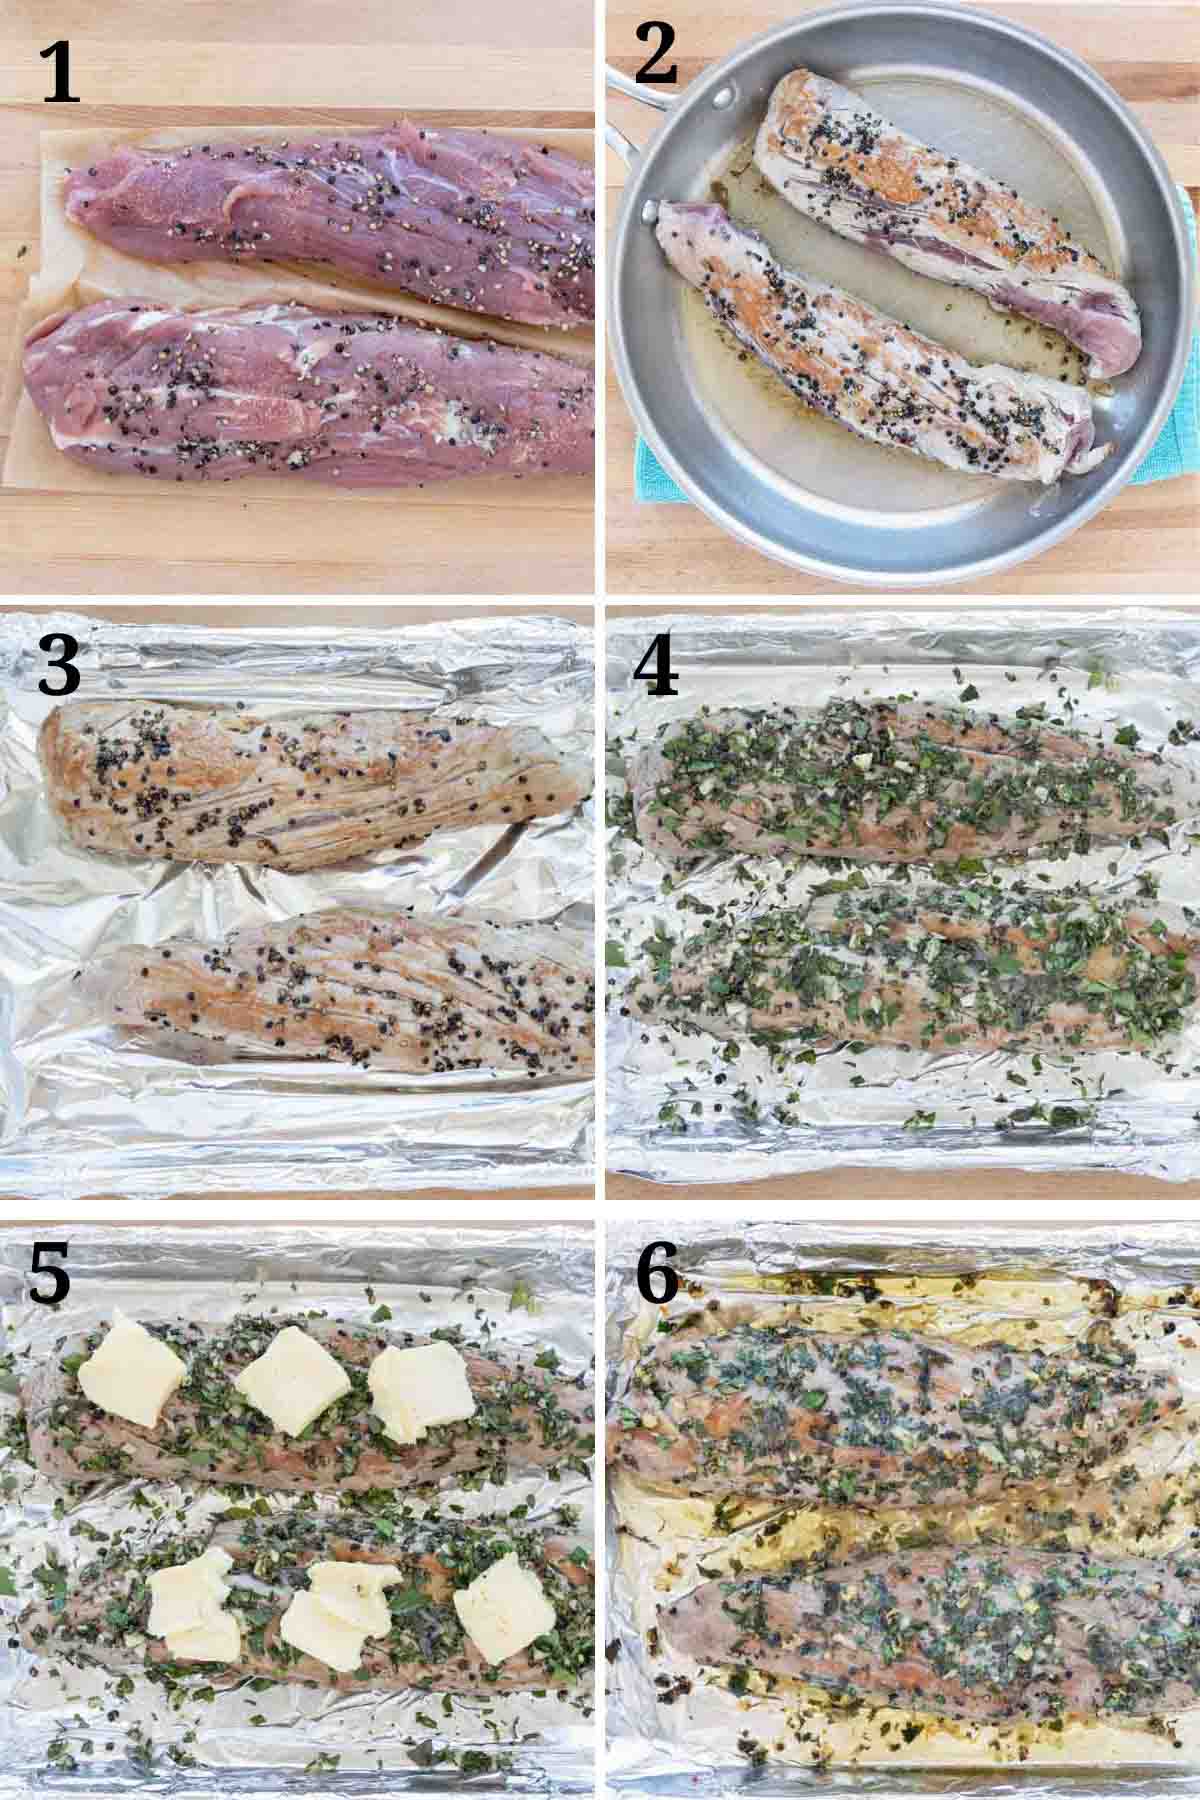 six images showing how to make a garlic herb roasted pork tenderloin